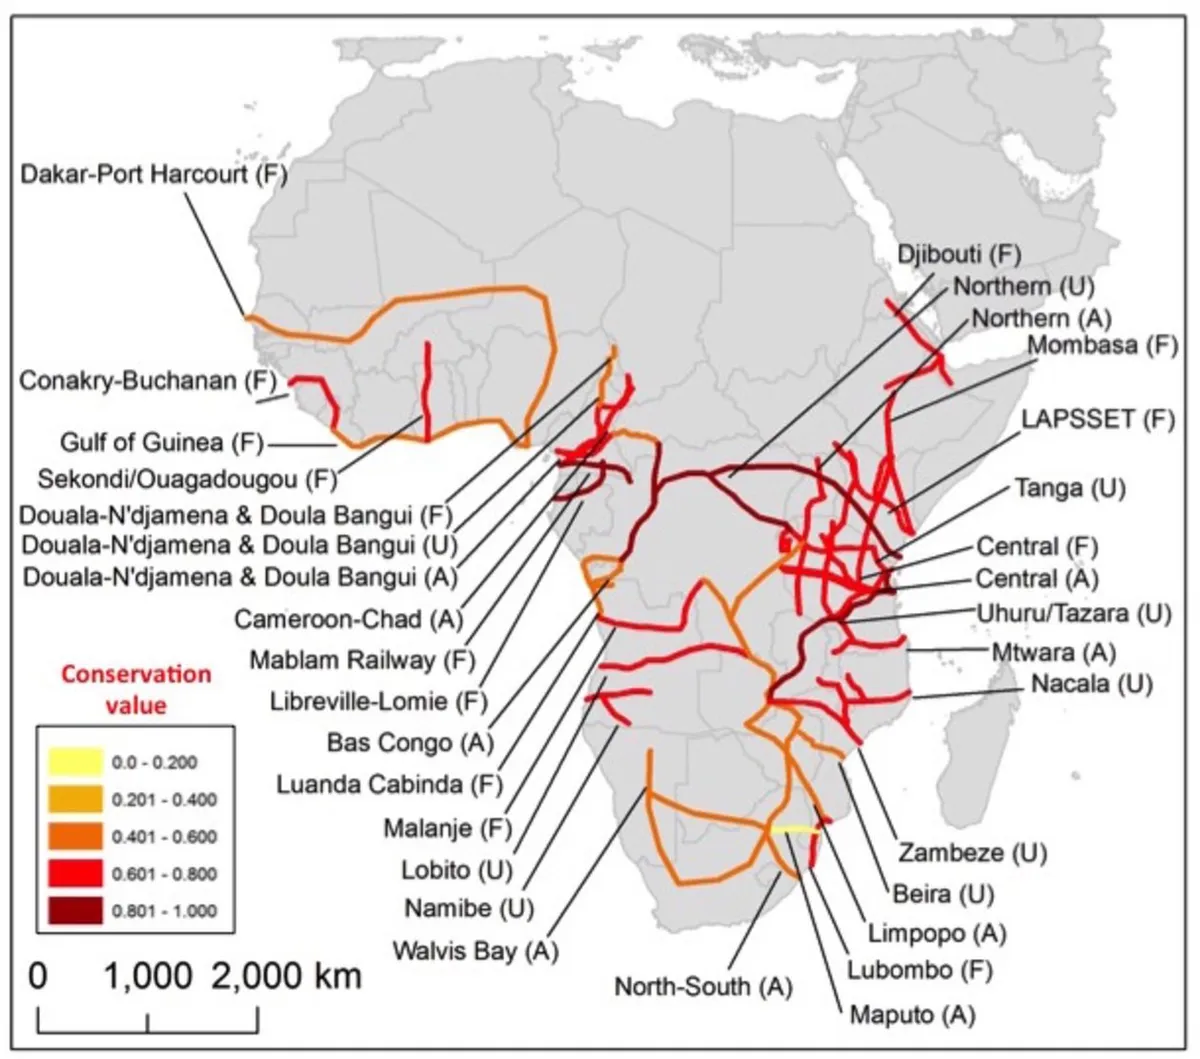 Proposed and ongoing ‘development corridors’ in sub-Saharan Africa, ranked by the relative conservation value of habitats likely to be affected by each corrido © Bill Laurance/Sean Sloan